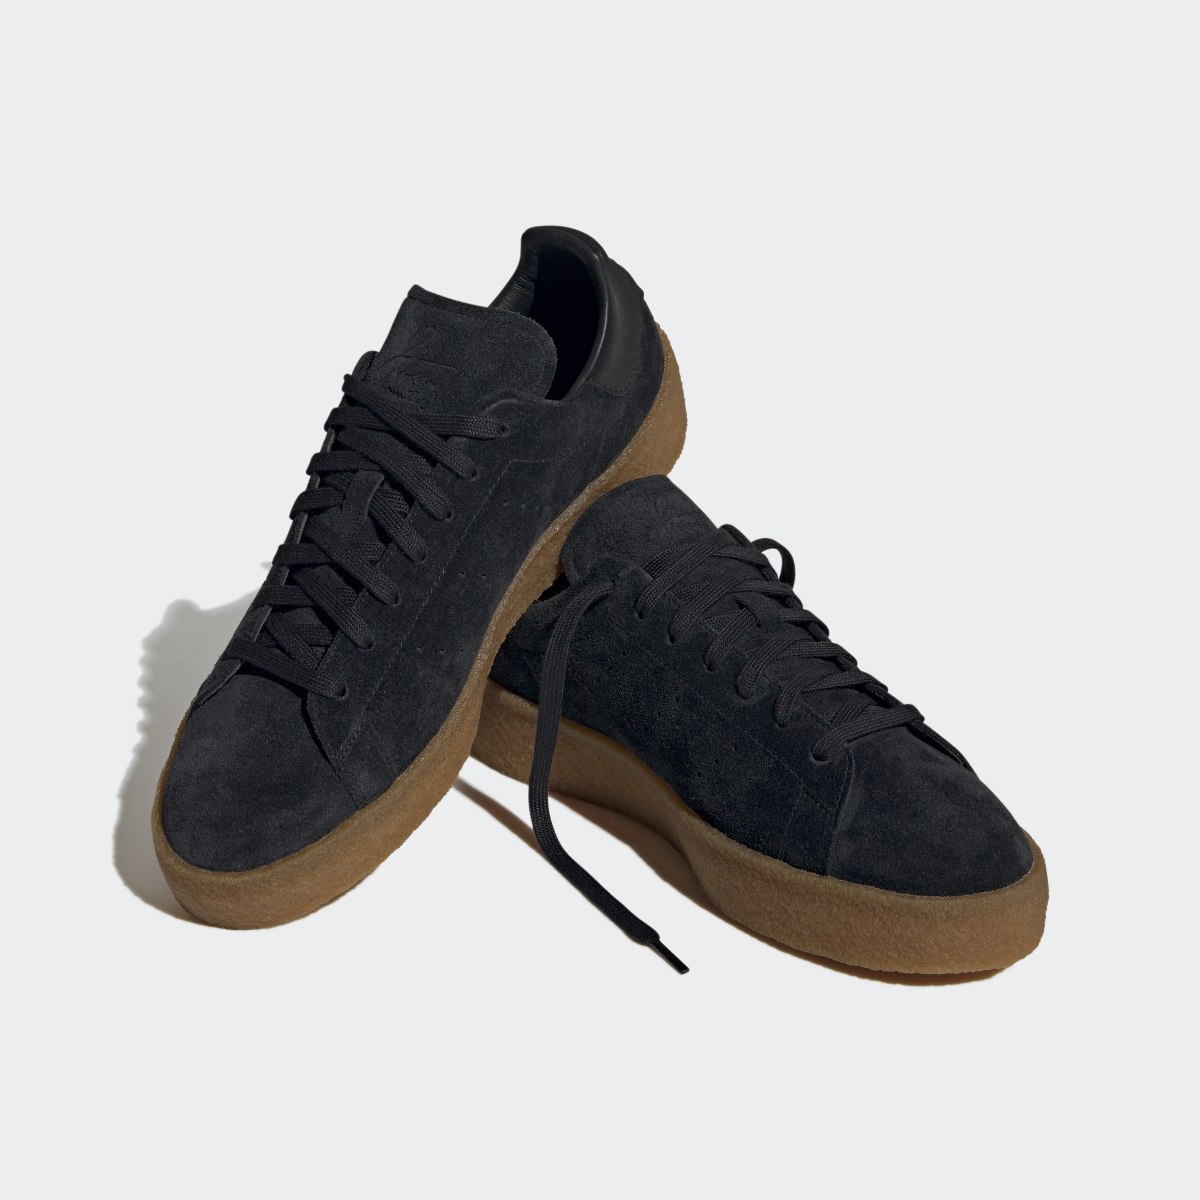 Adidas Stan Smith Crepe Shoes. 5